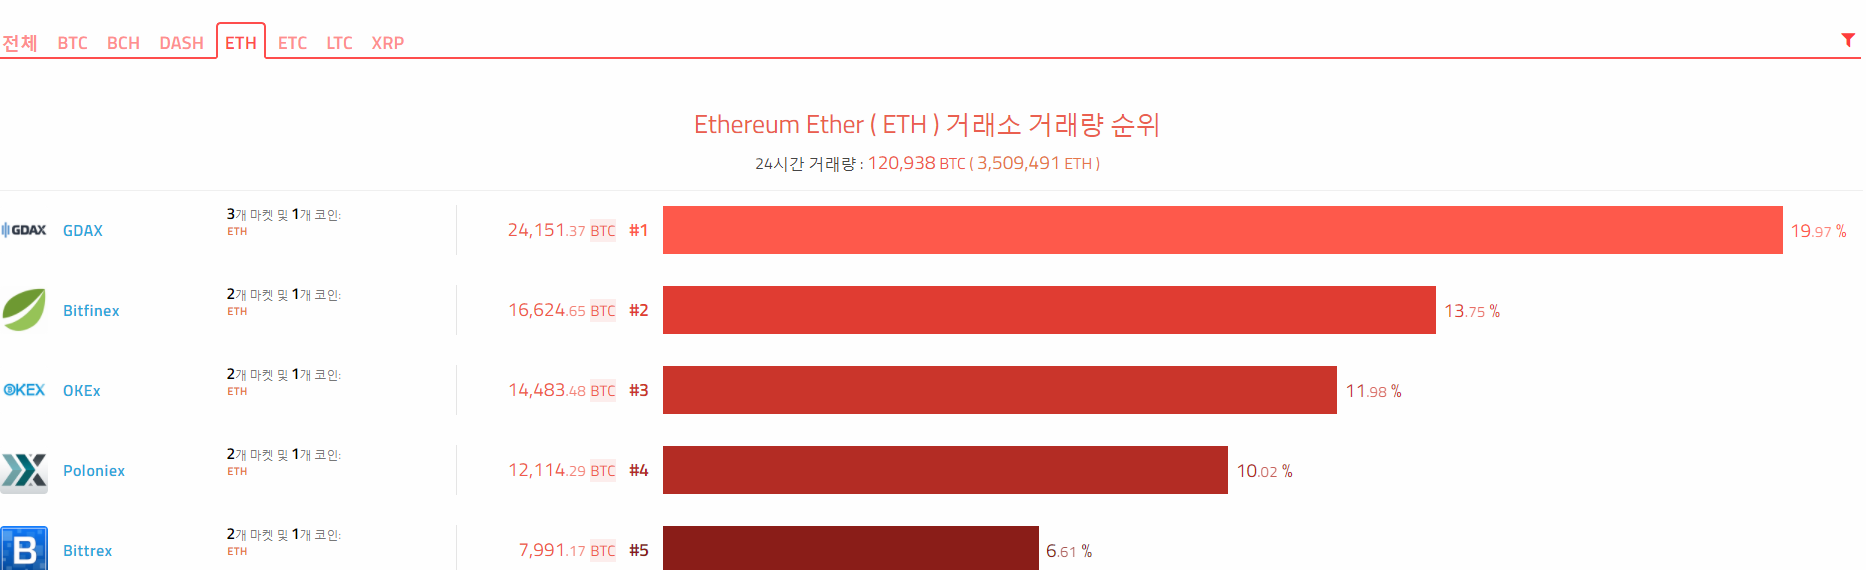 eth.PNG